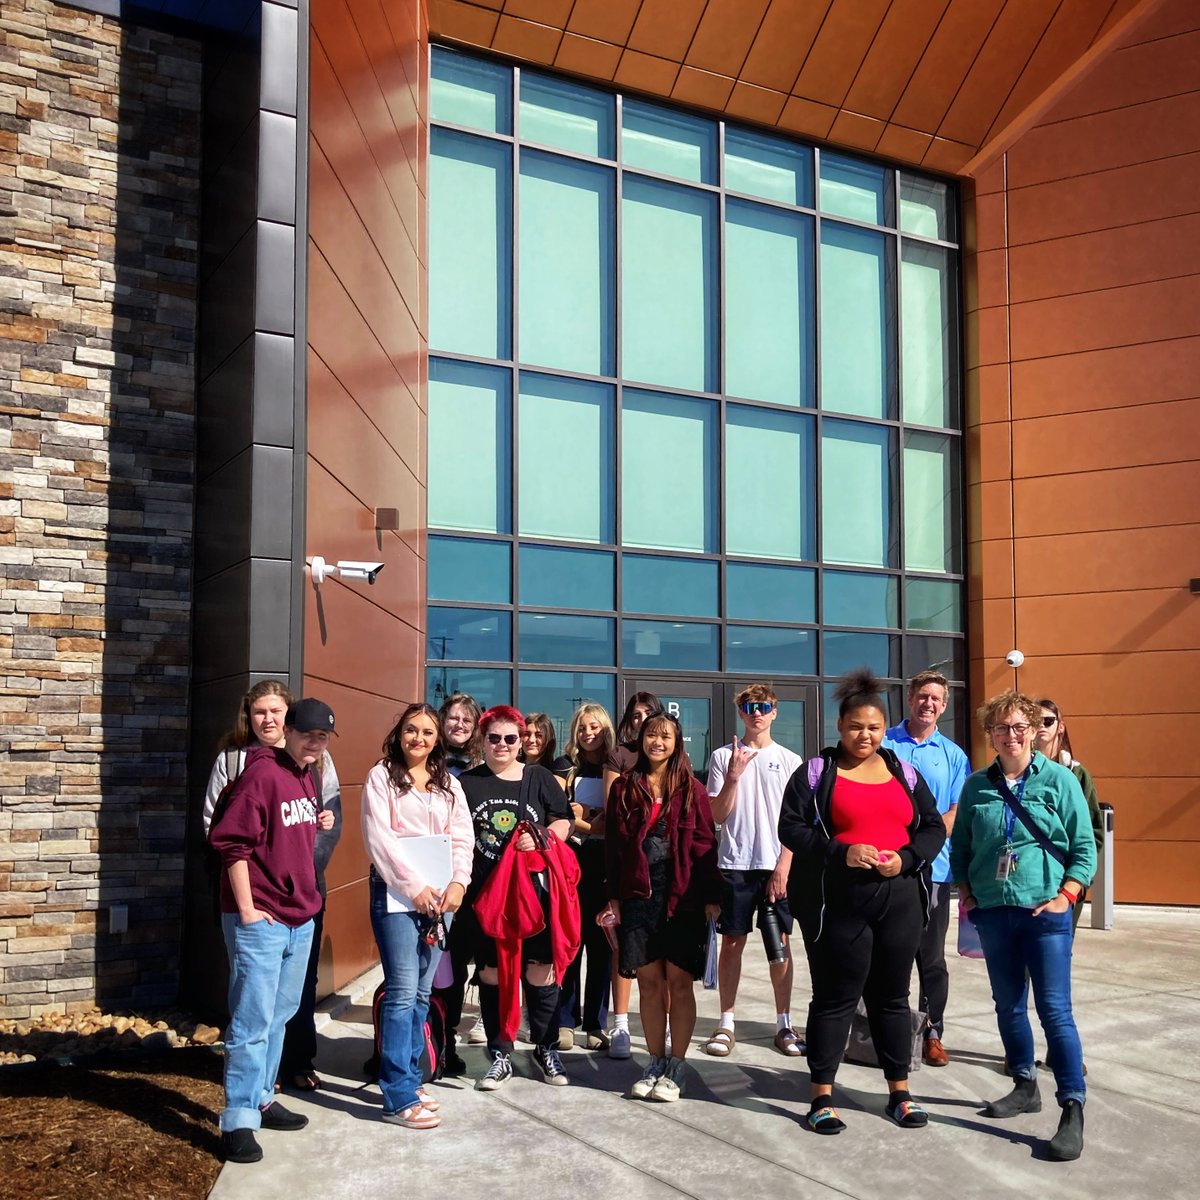 Monday starts w/ yes! Thrilled 2 groups of @PoudreSchools students are visiting Acute Care Facility at Larimer County's Longview Campus. Students will tour, engage w/ staff & ask questions. #mentalhealthadvocate #behavioralhealthmatters